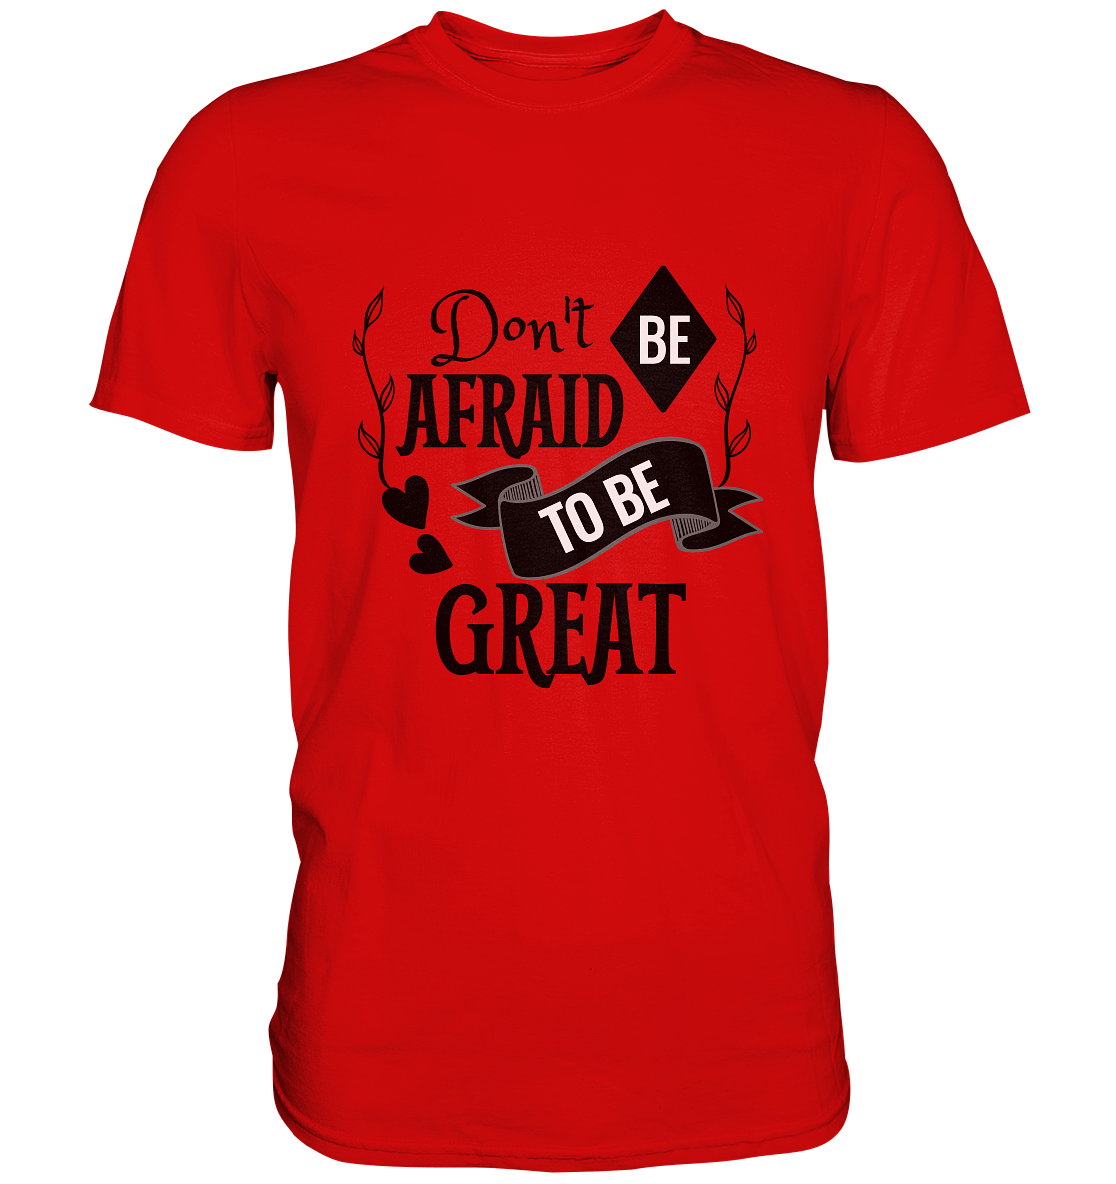 Don´t be afraid to be great. Motto - Unisex Premium Shirt